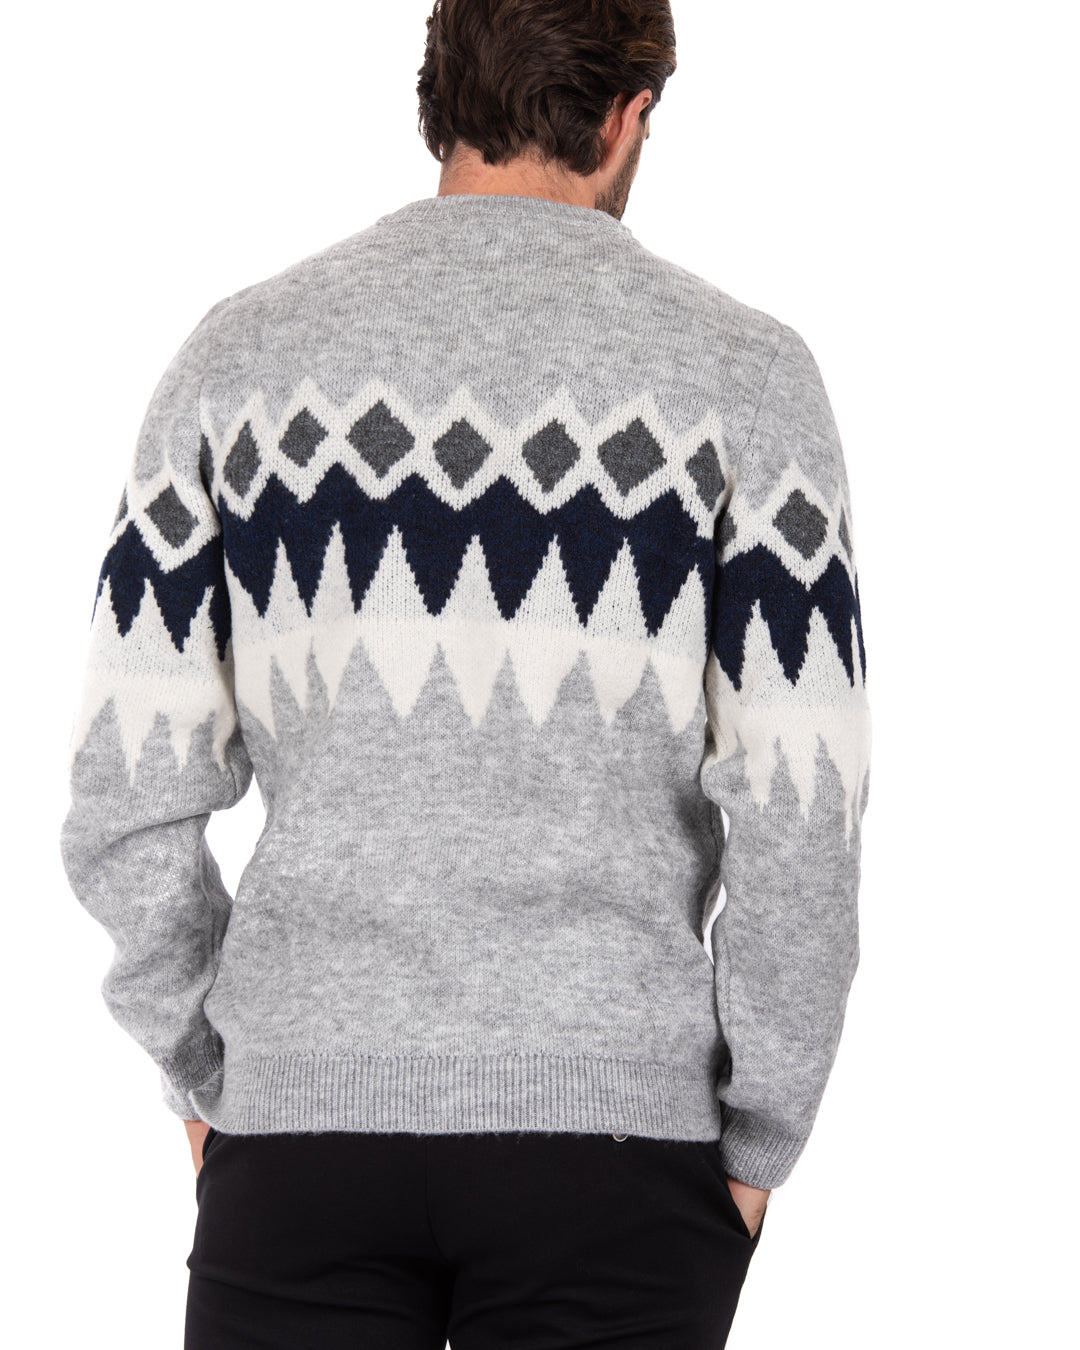 Marken - sweater with gray and blue pattern